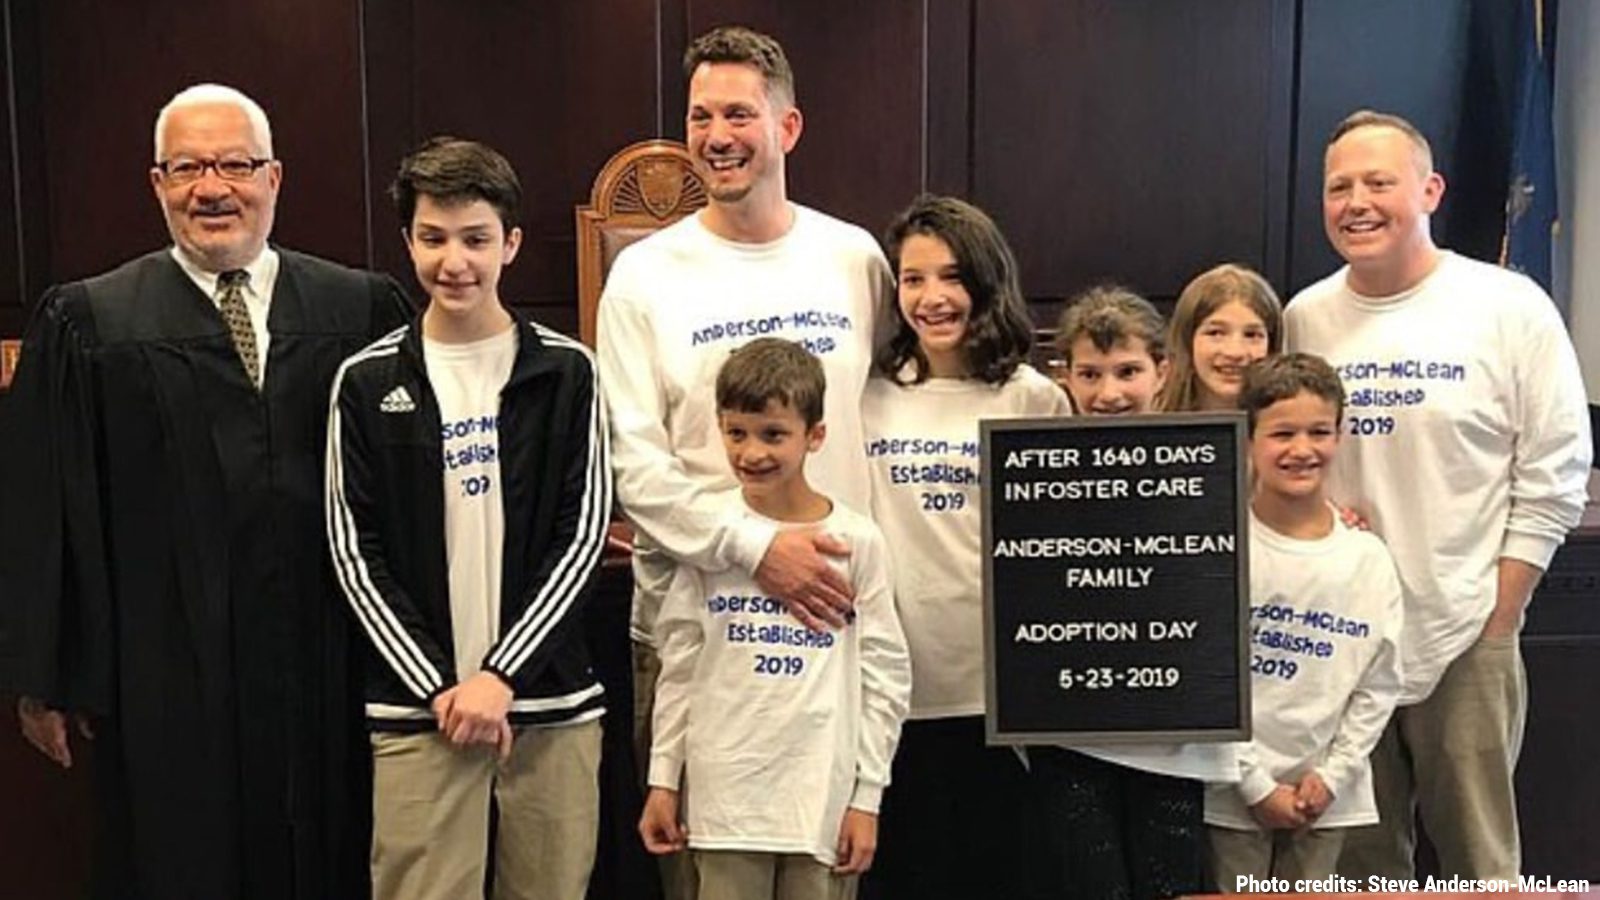 Dads Adopt a Family of 6 Siblings to Keep Them Together